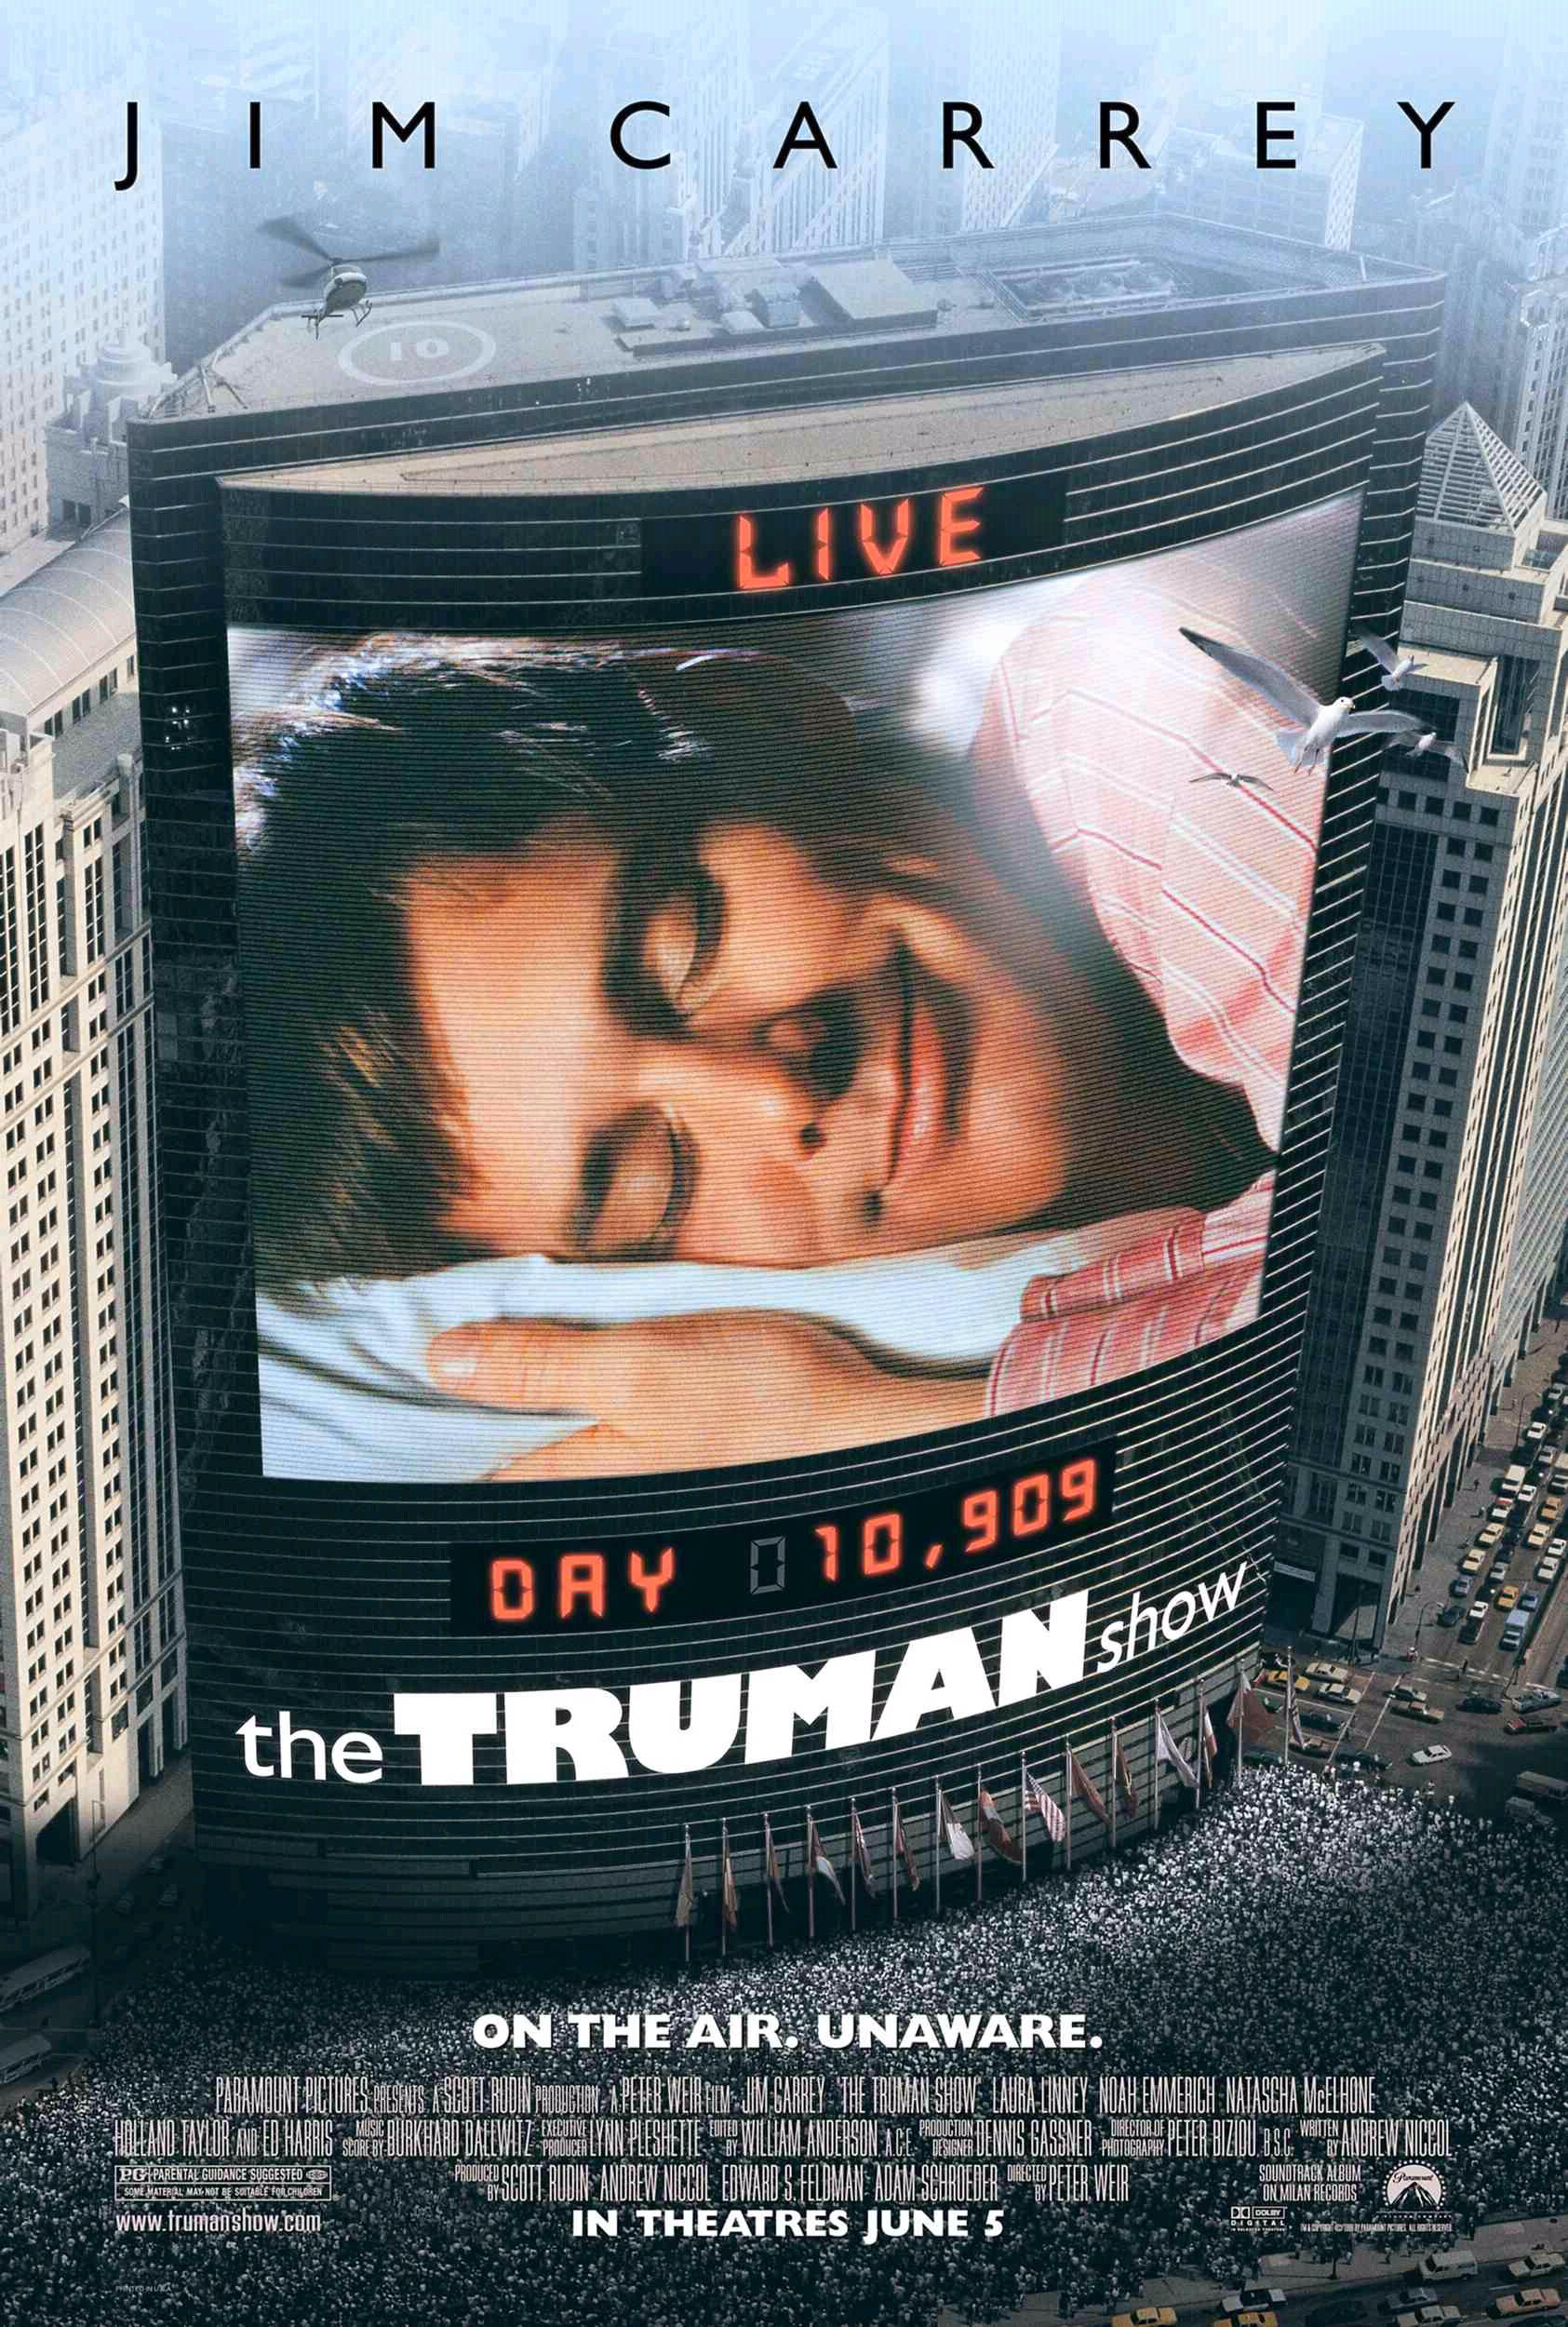 Poster for the movie The Truman Show